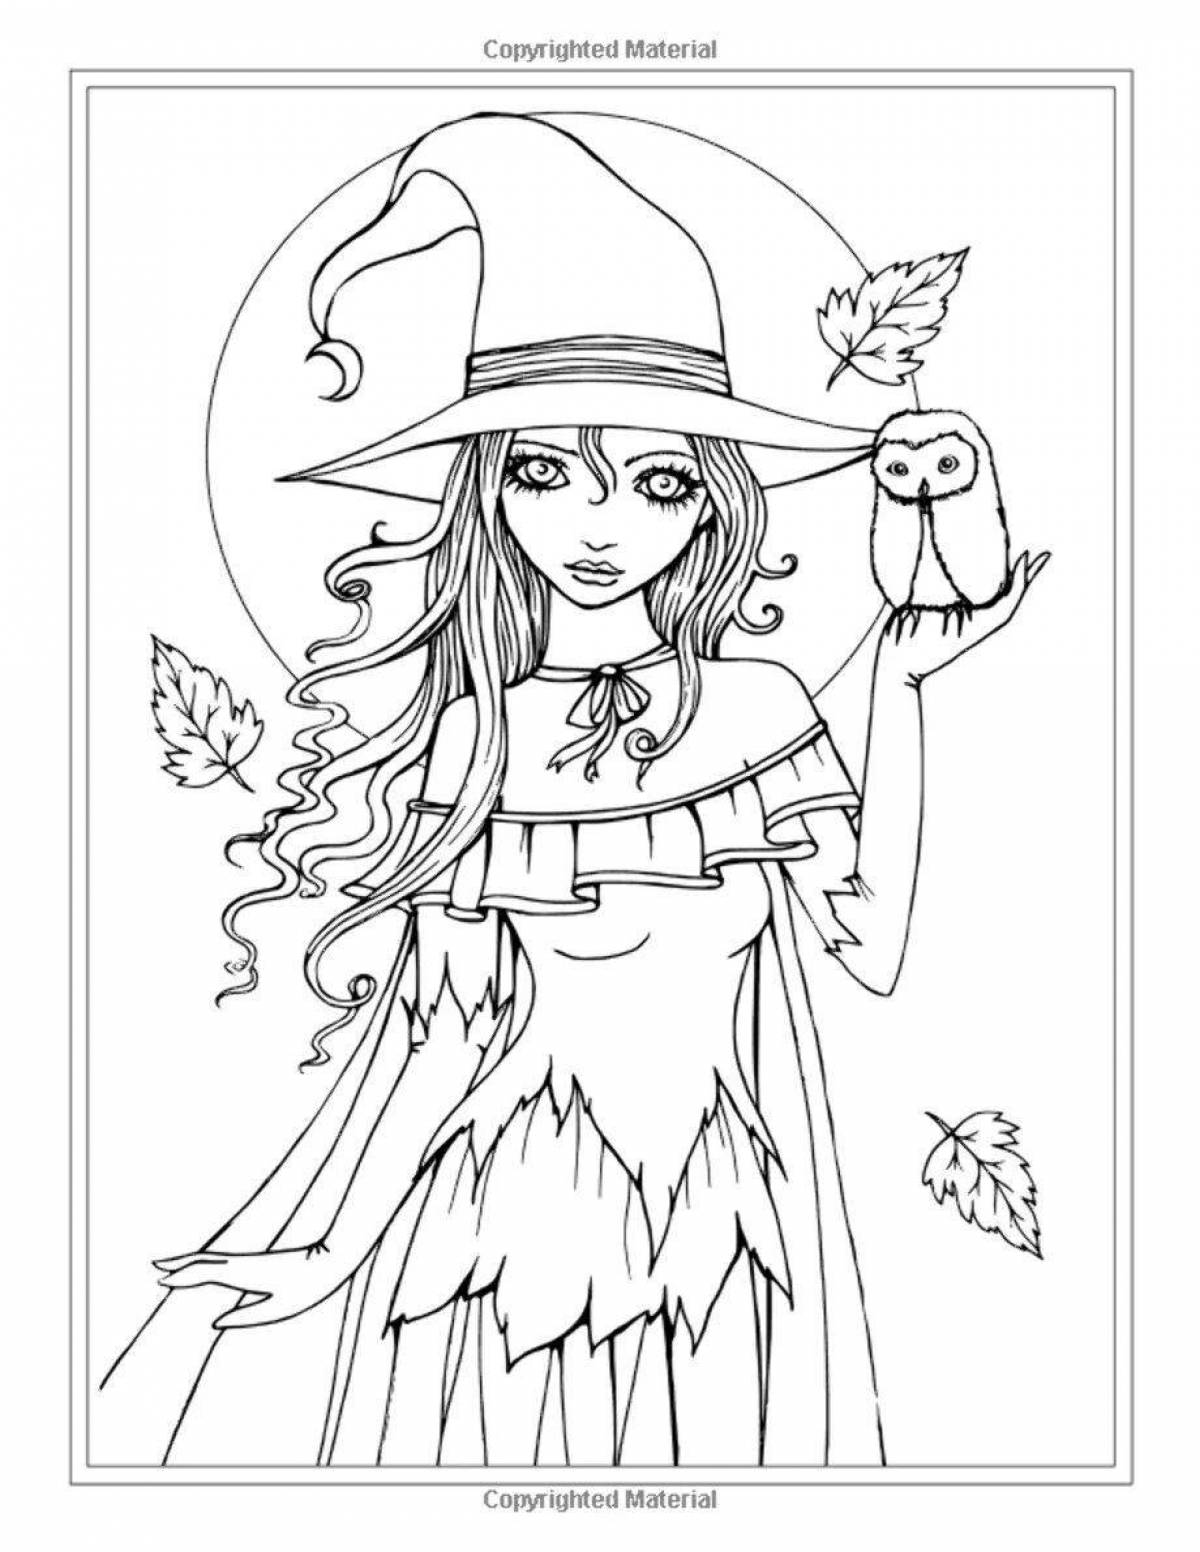 Fancy halloween coloring book for girls